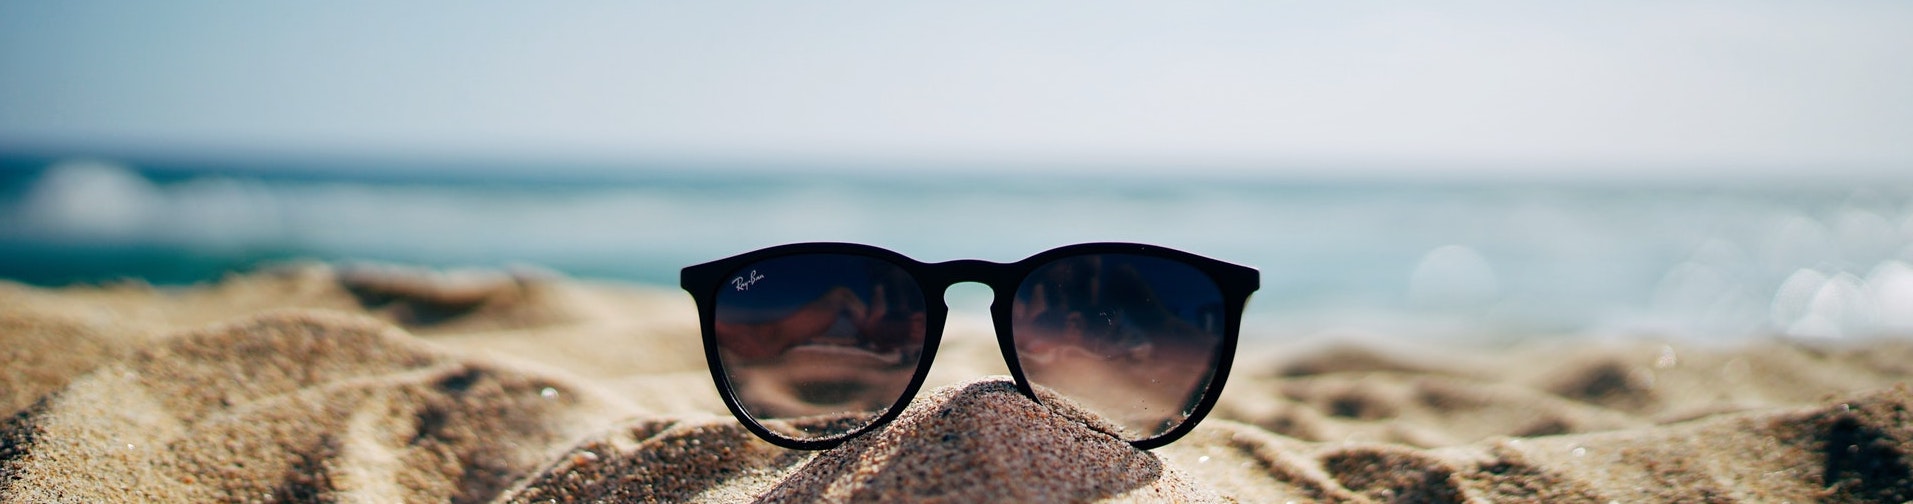 Your recruitment doesn’t have to take a Summer break